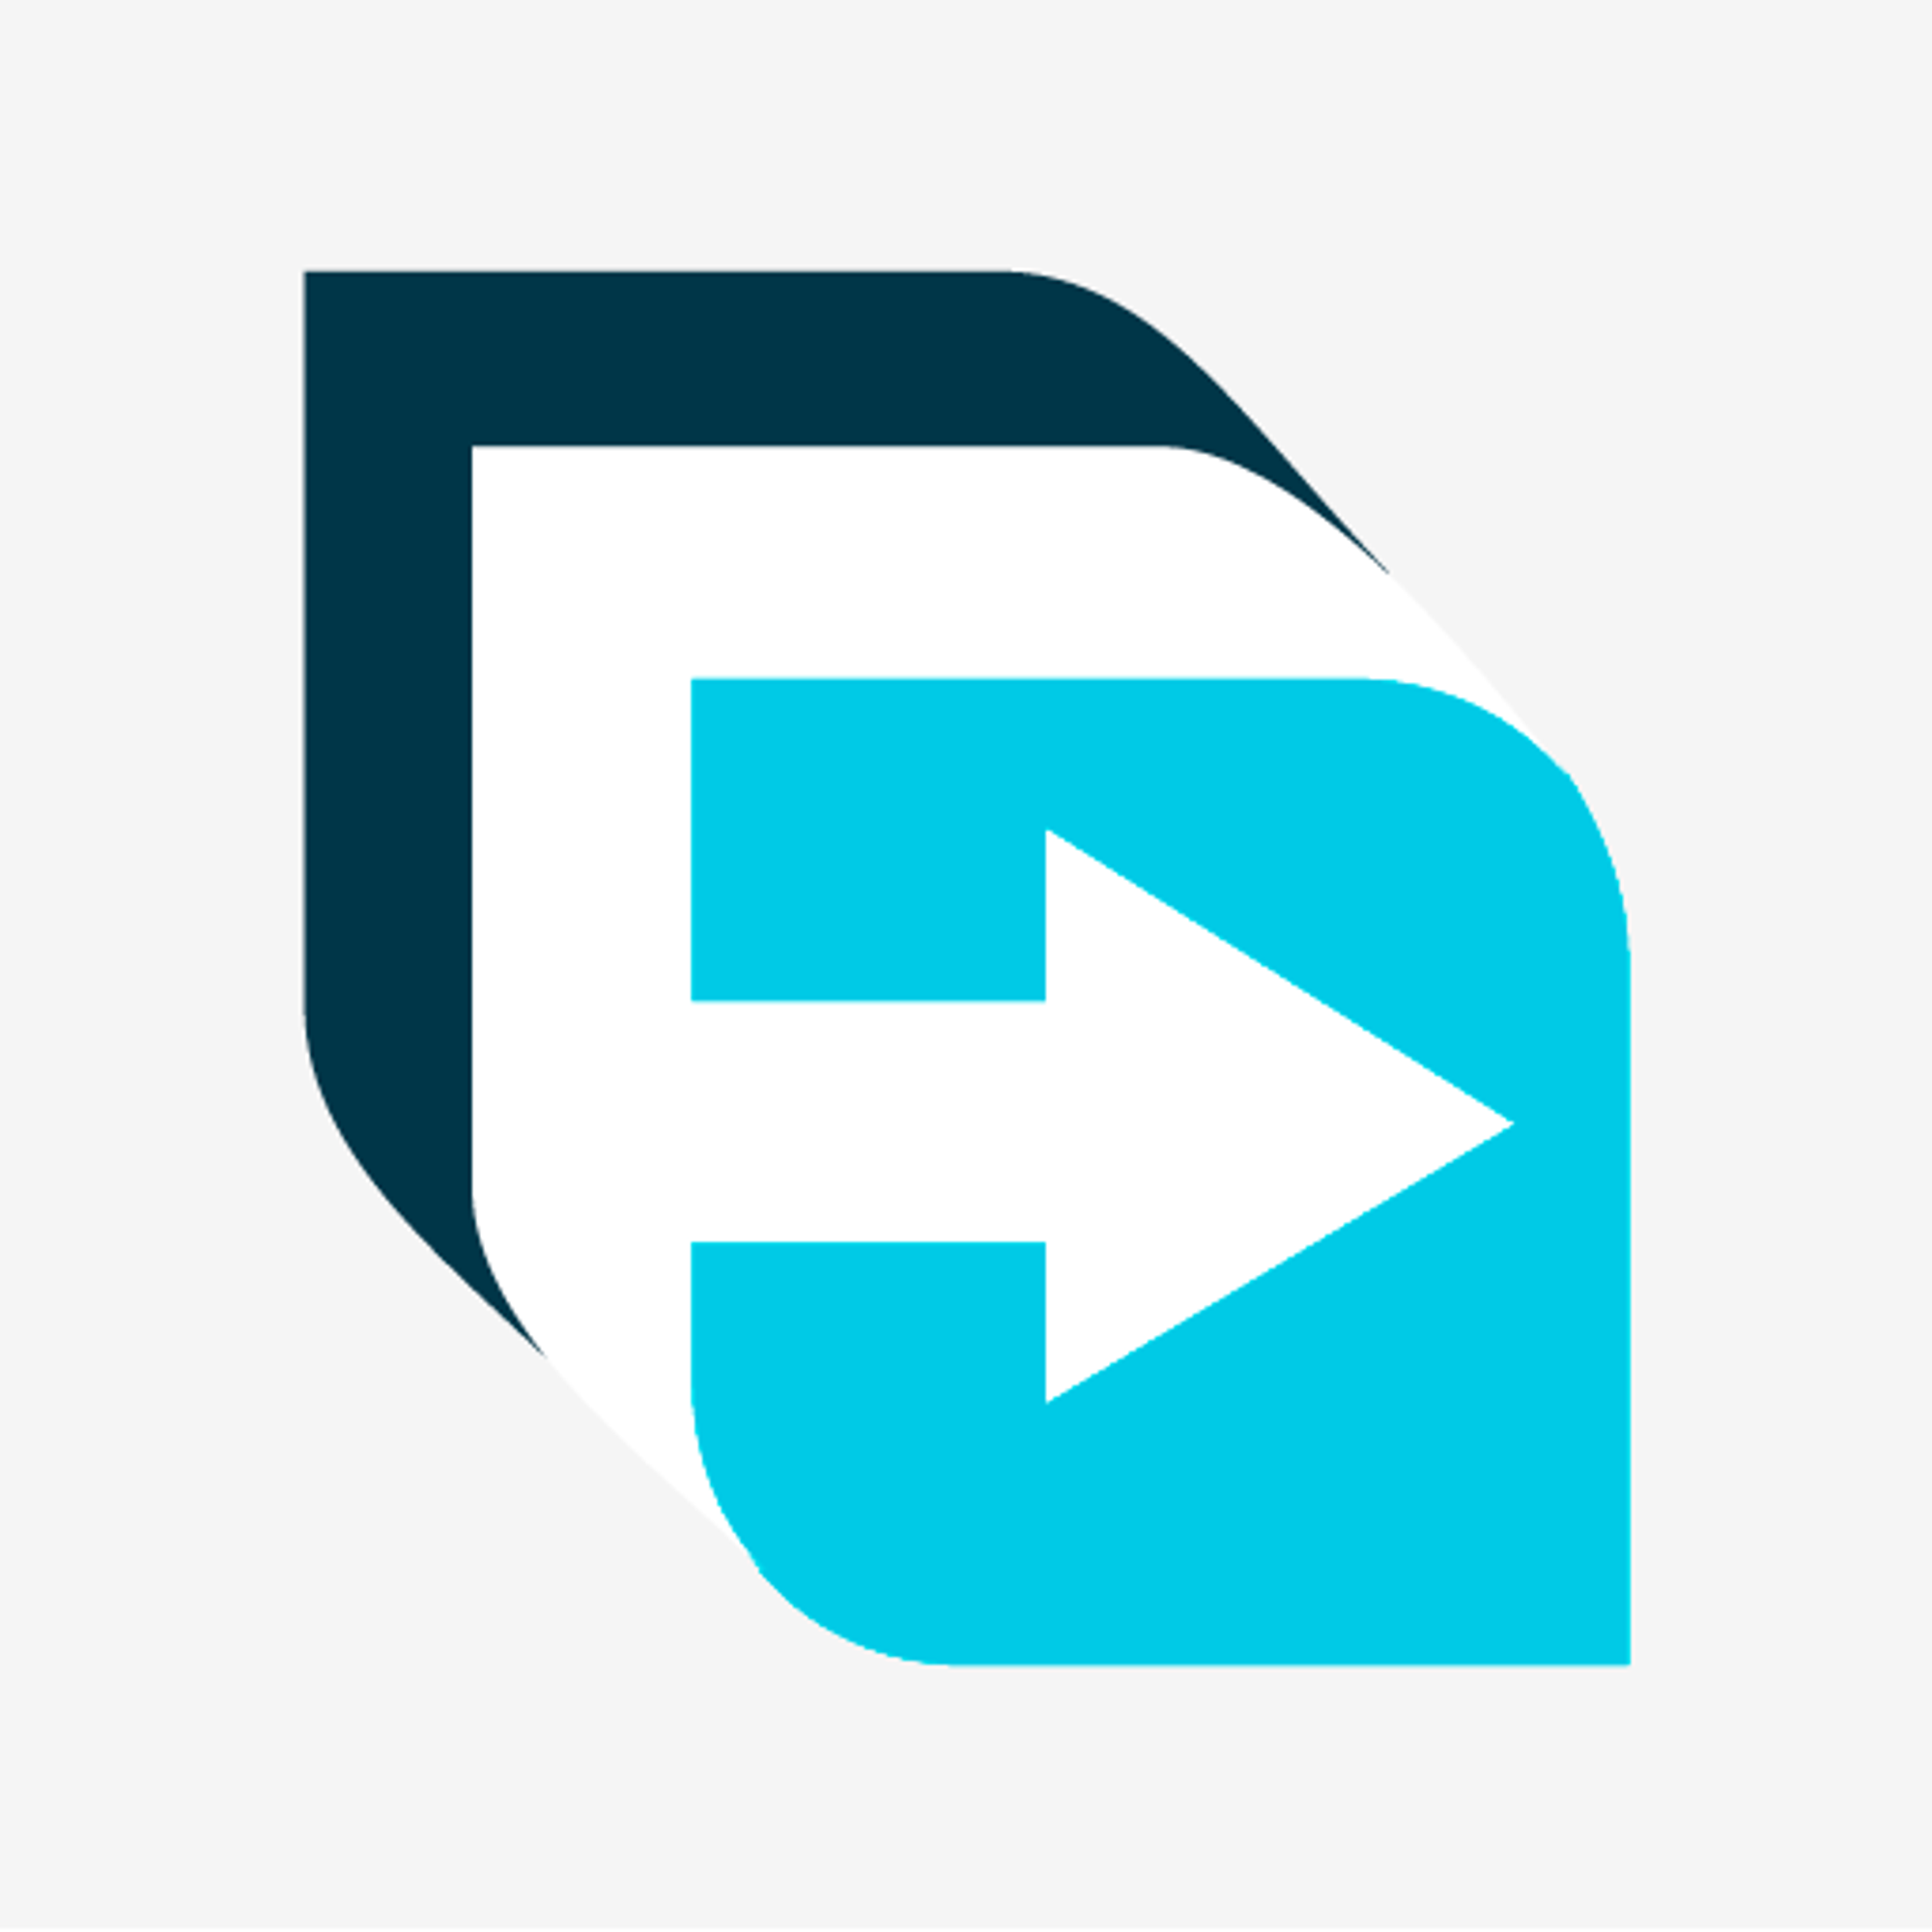 Free Download Manager - FDM - Apps on Google Play